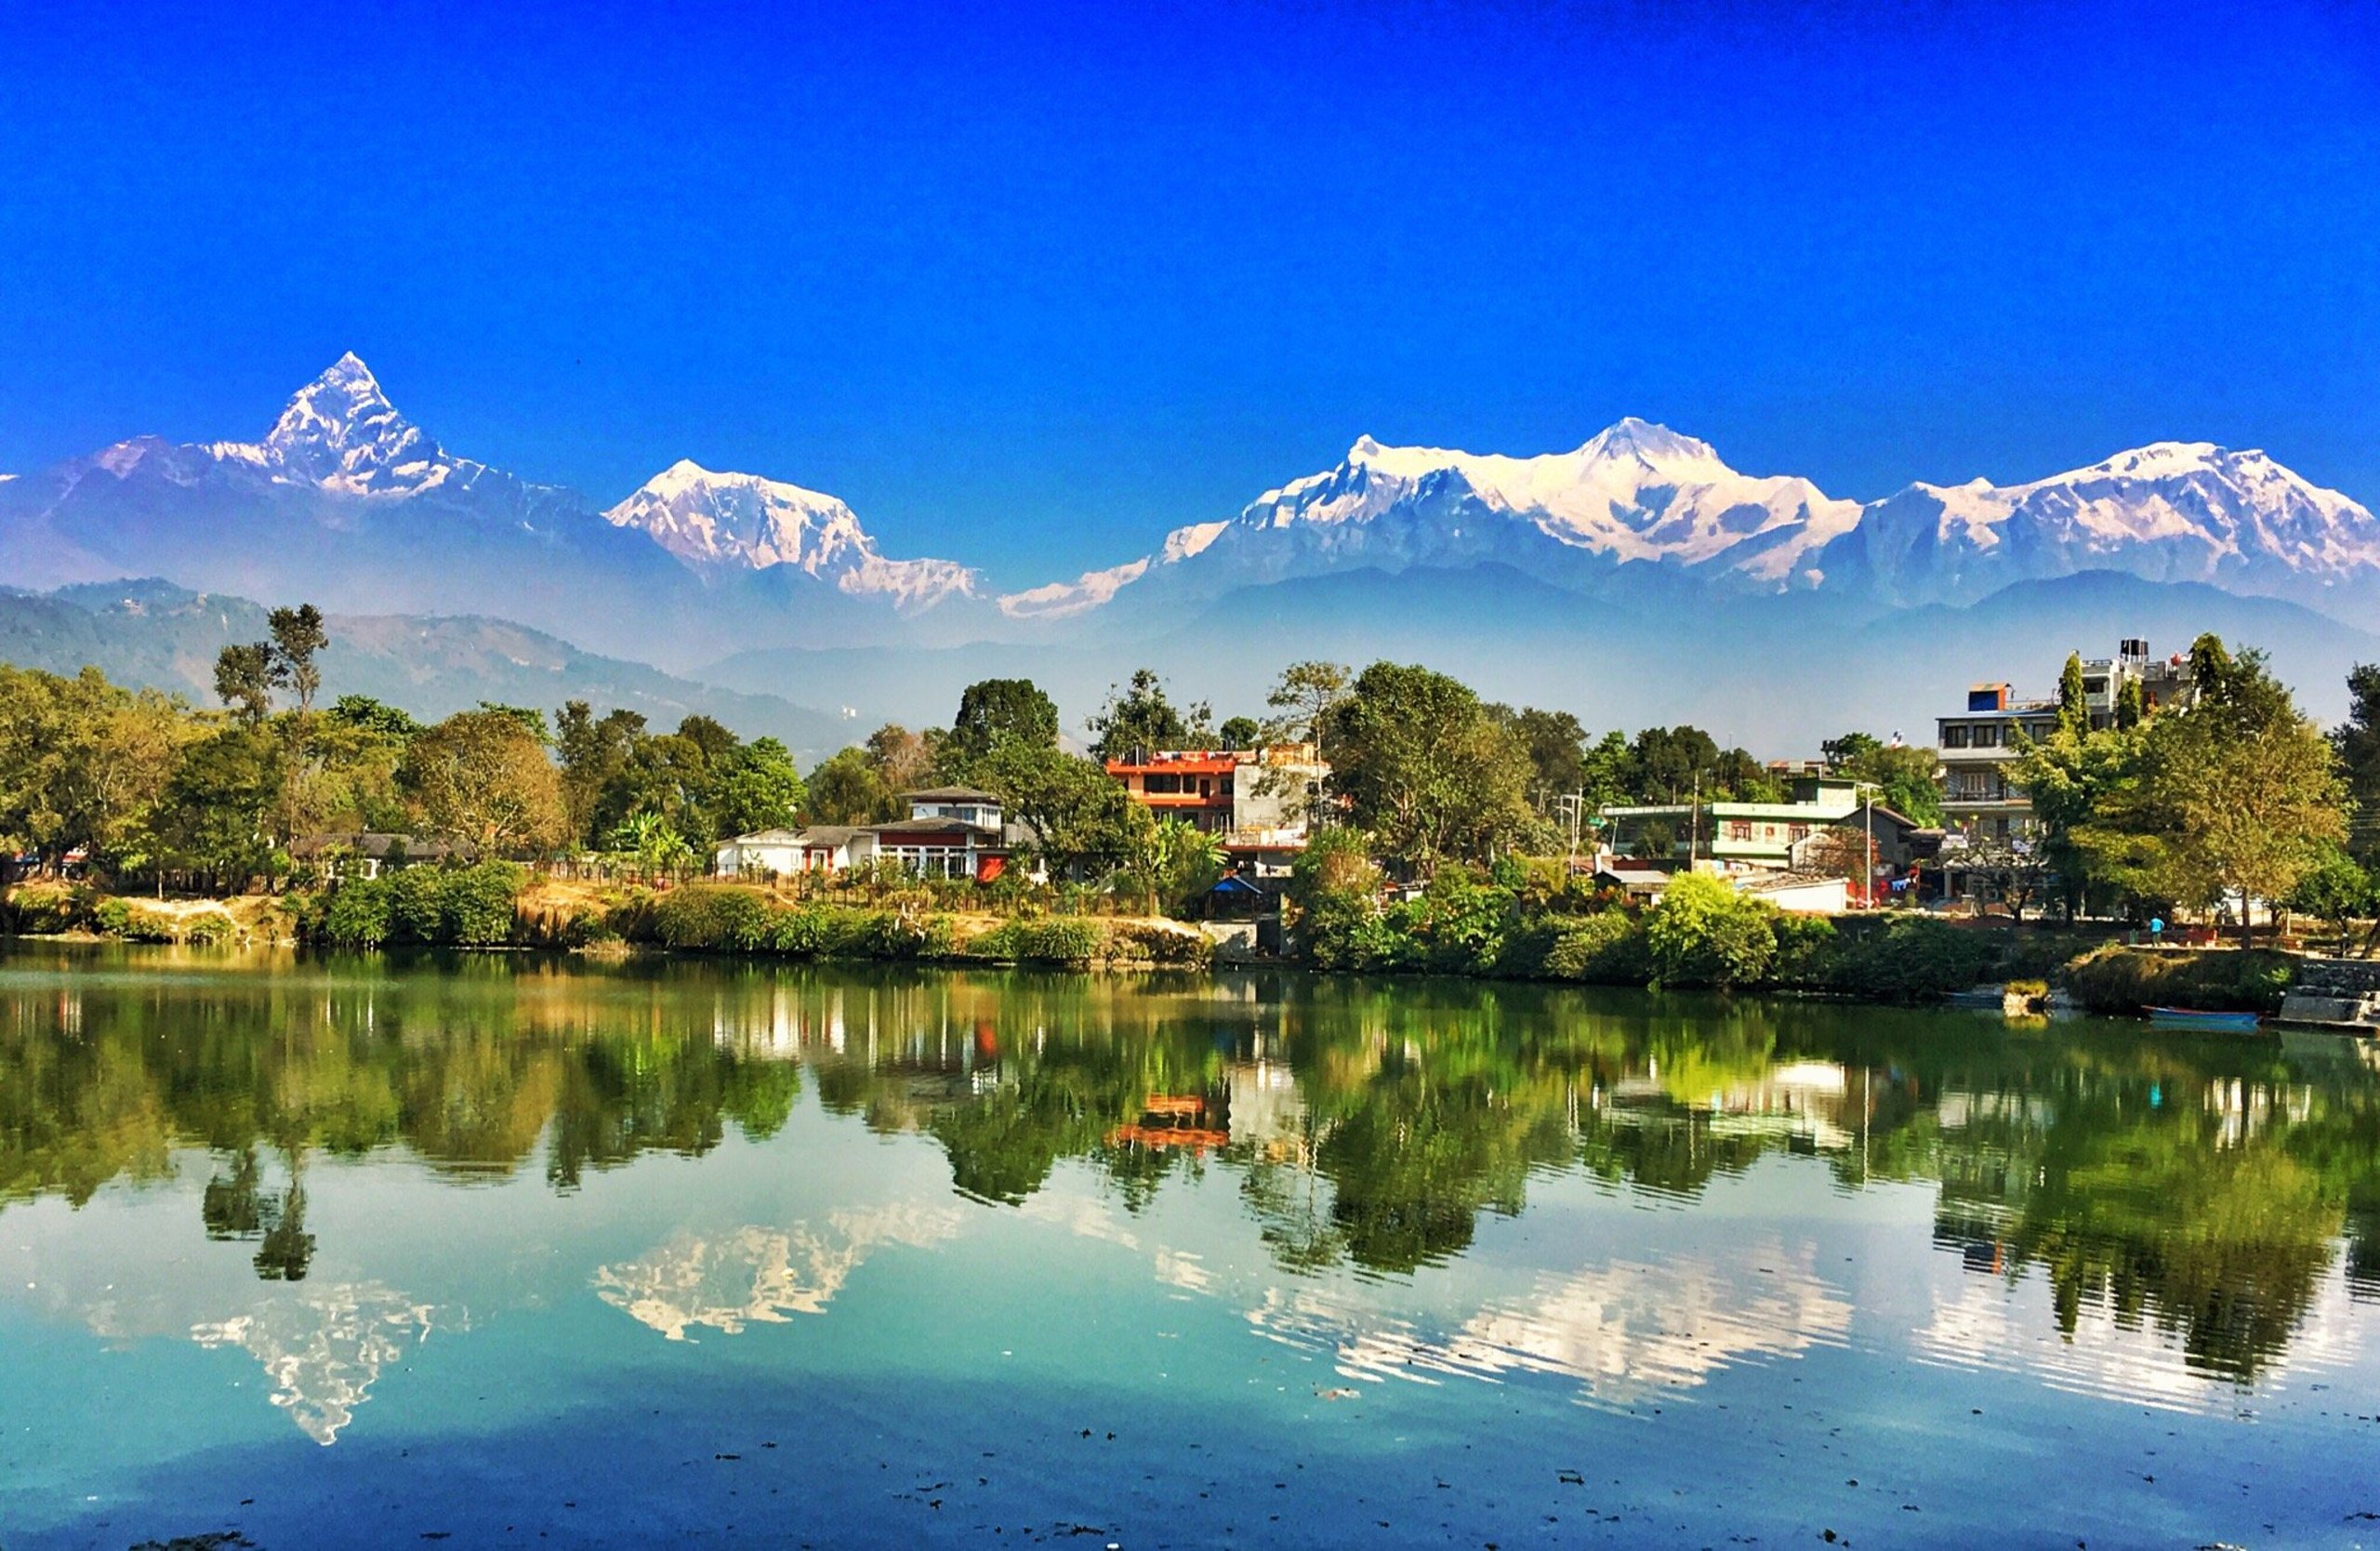 Find out the Hidden Mystery Behind the Name of Nepal